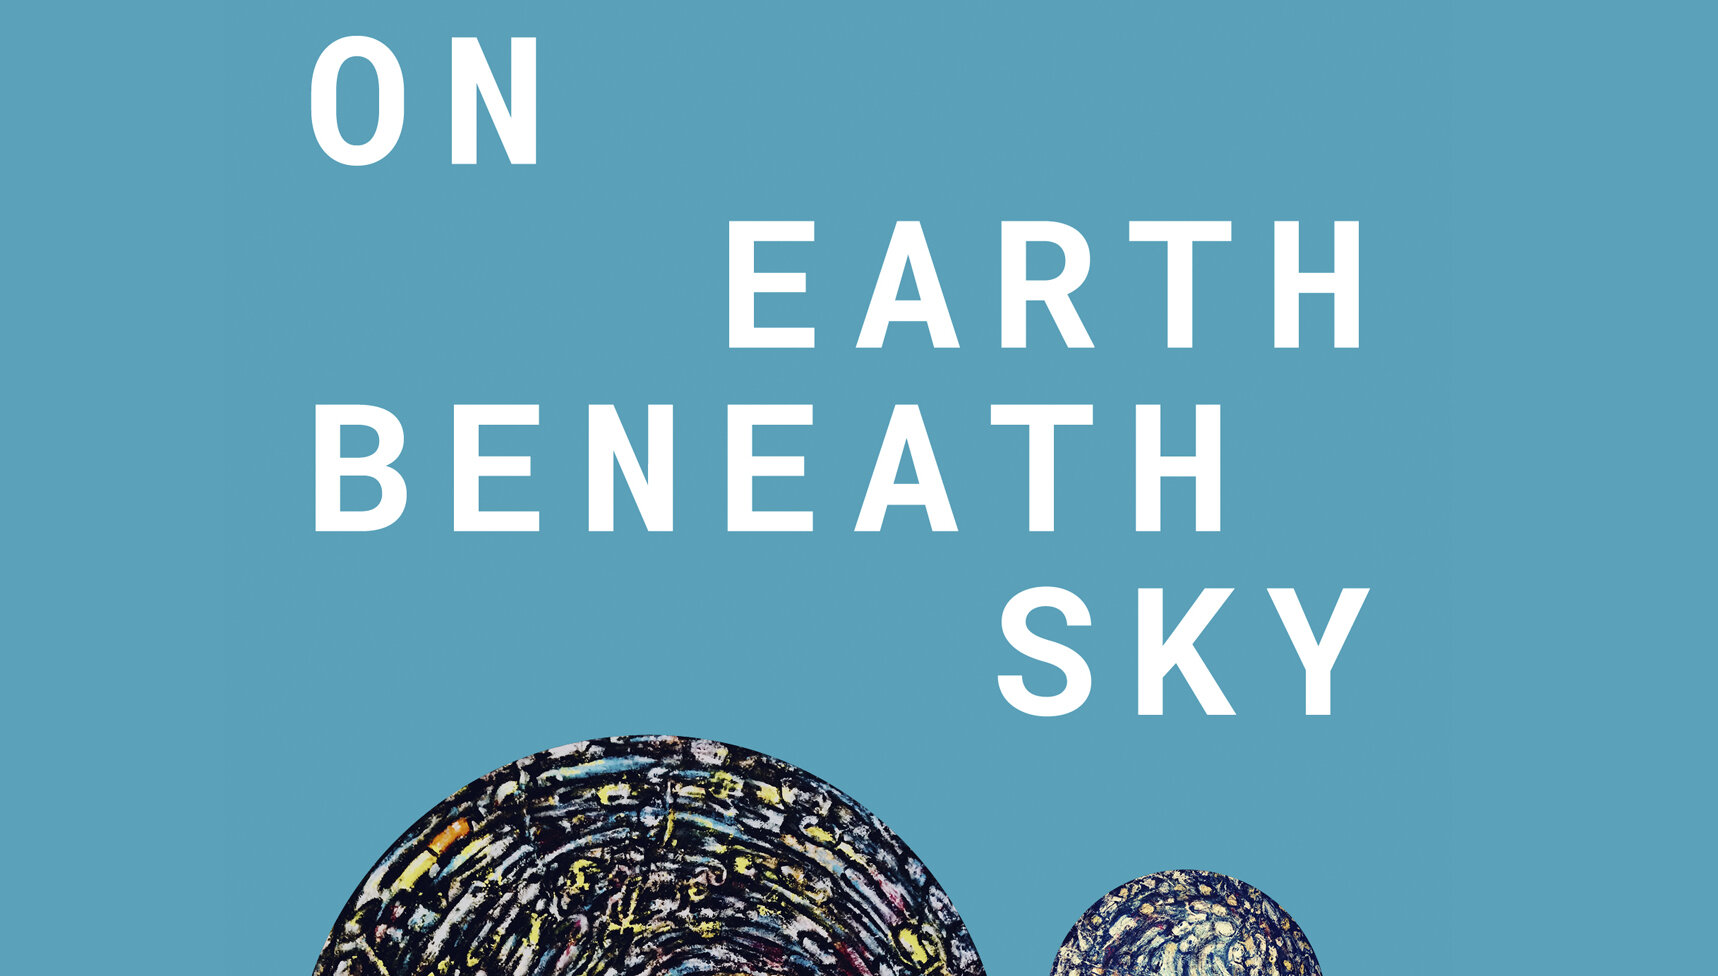 Poetry Northwest: Chath pierSath's 'On Earth Beneath Sky' is 'a